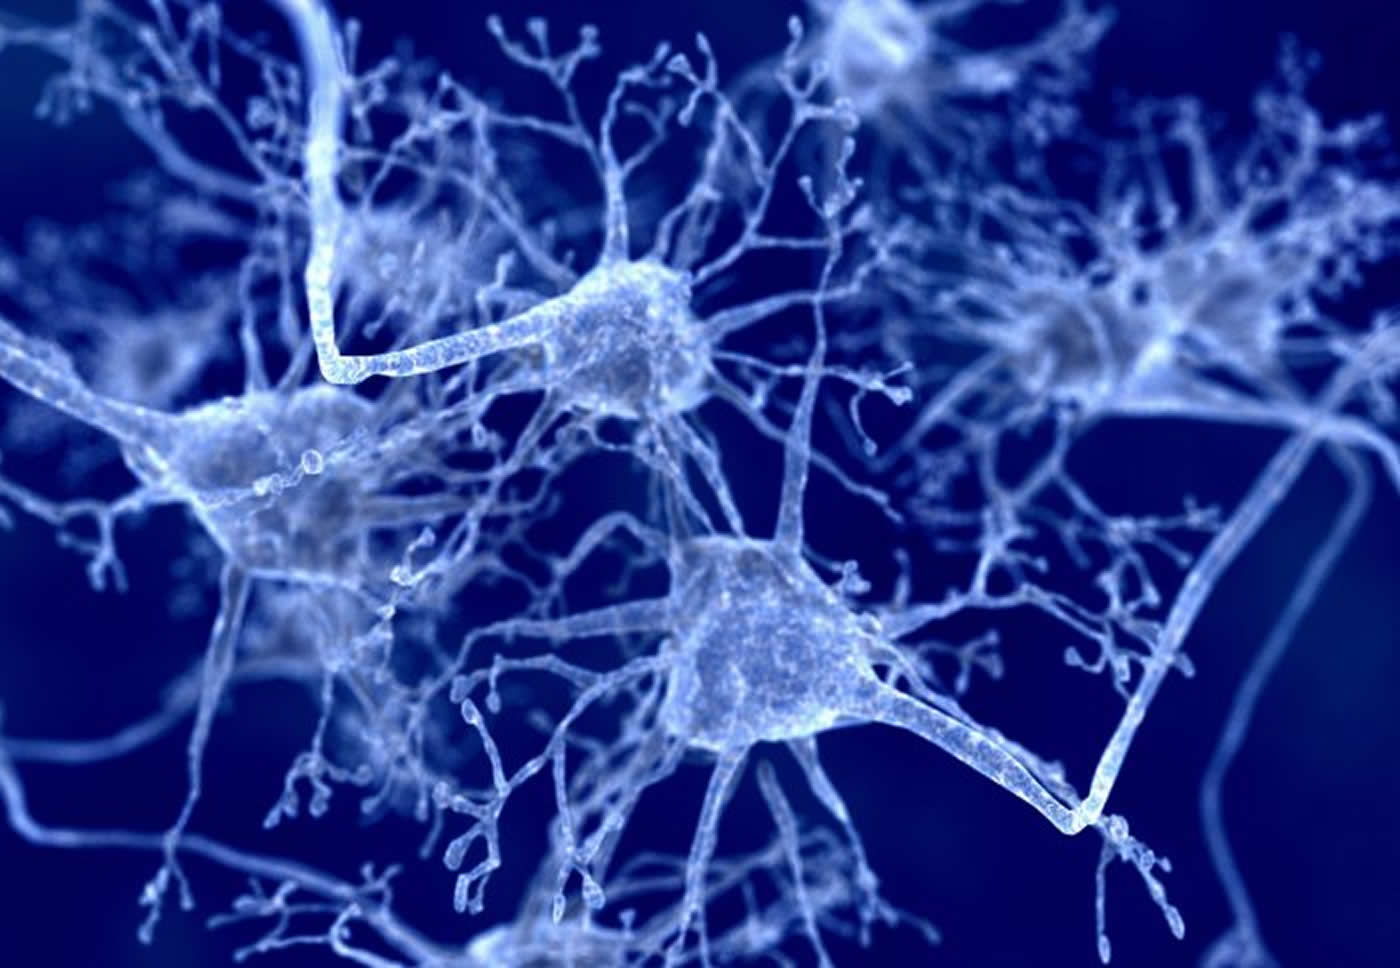 Neurons in blue are shown.